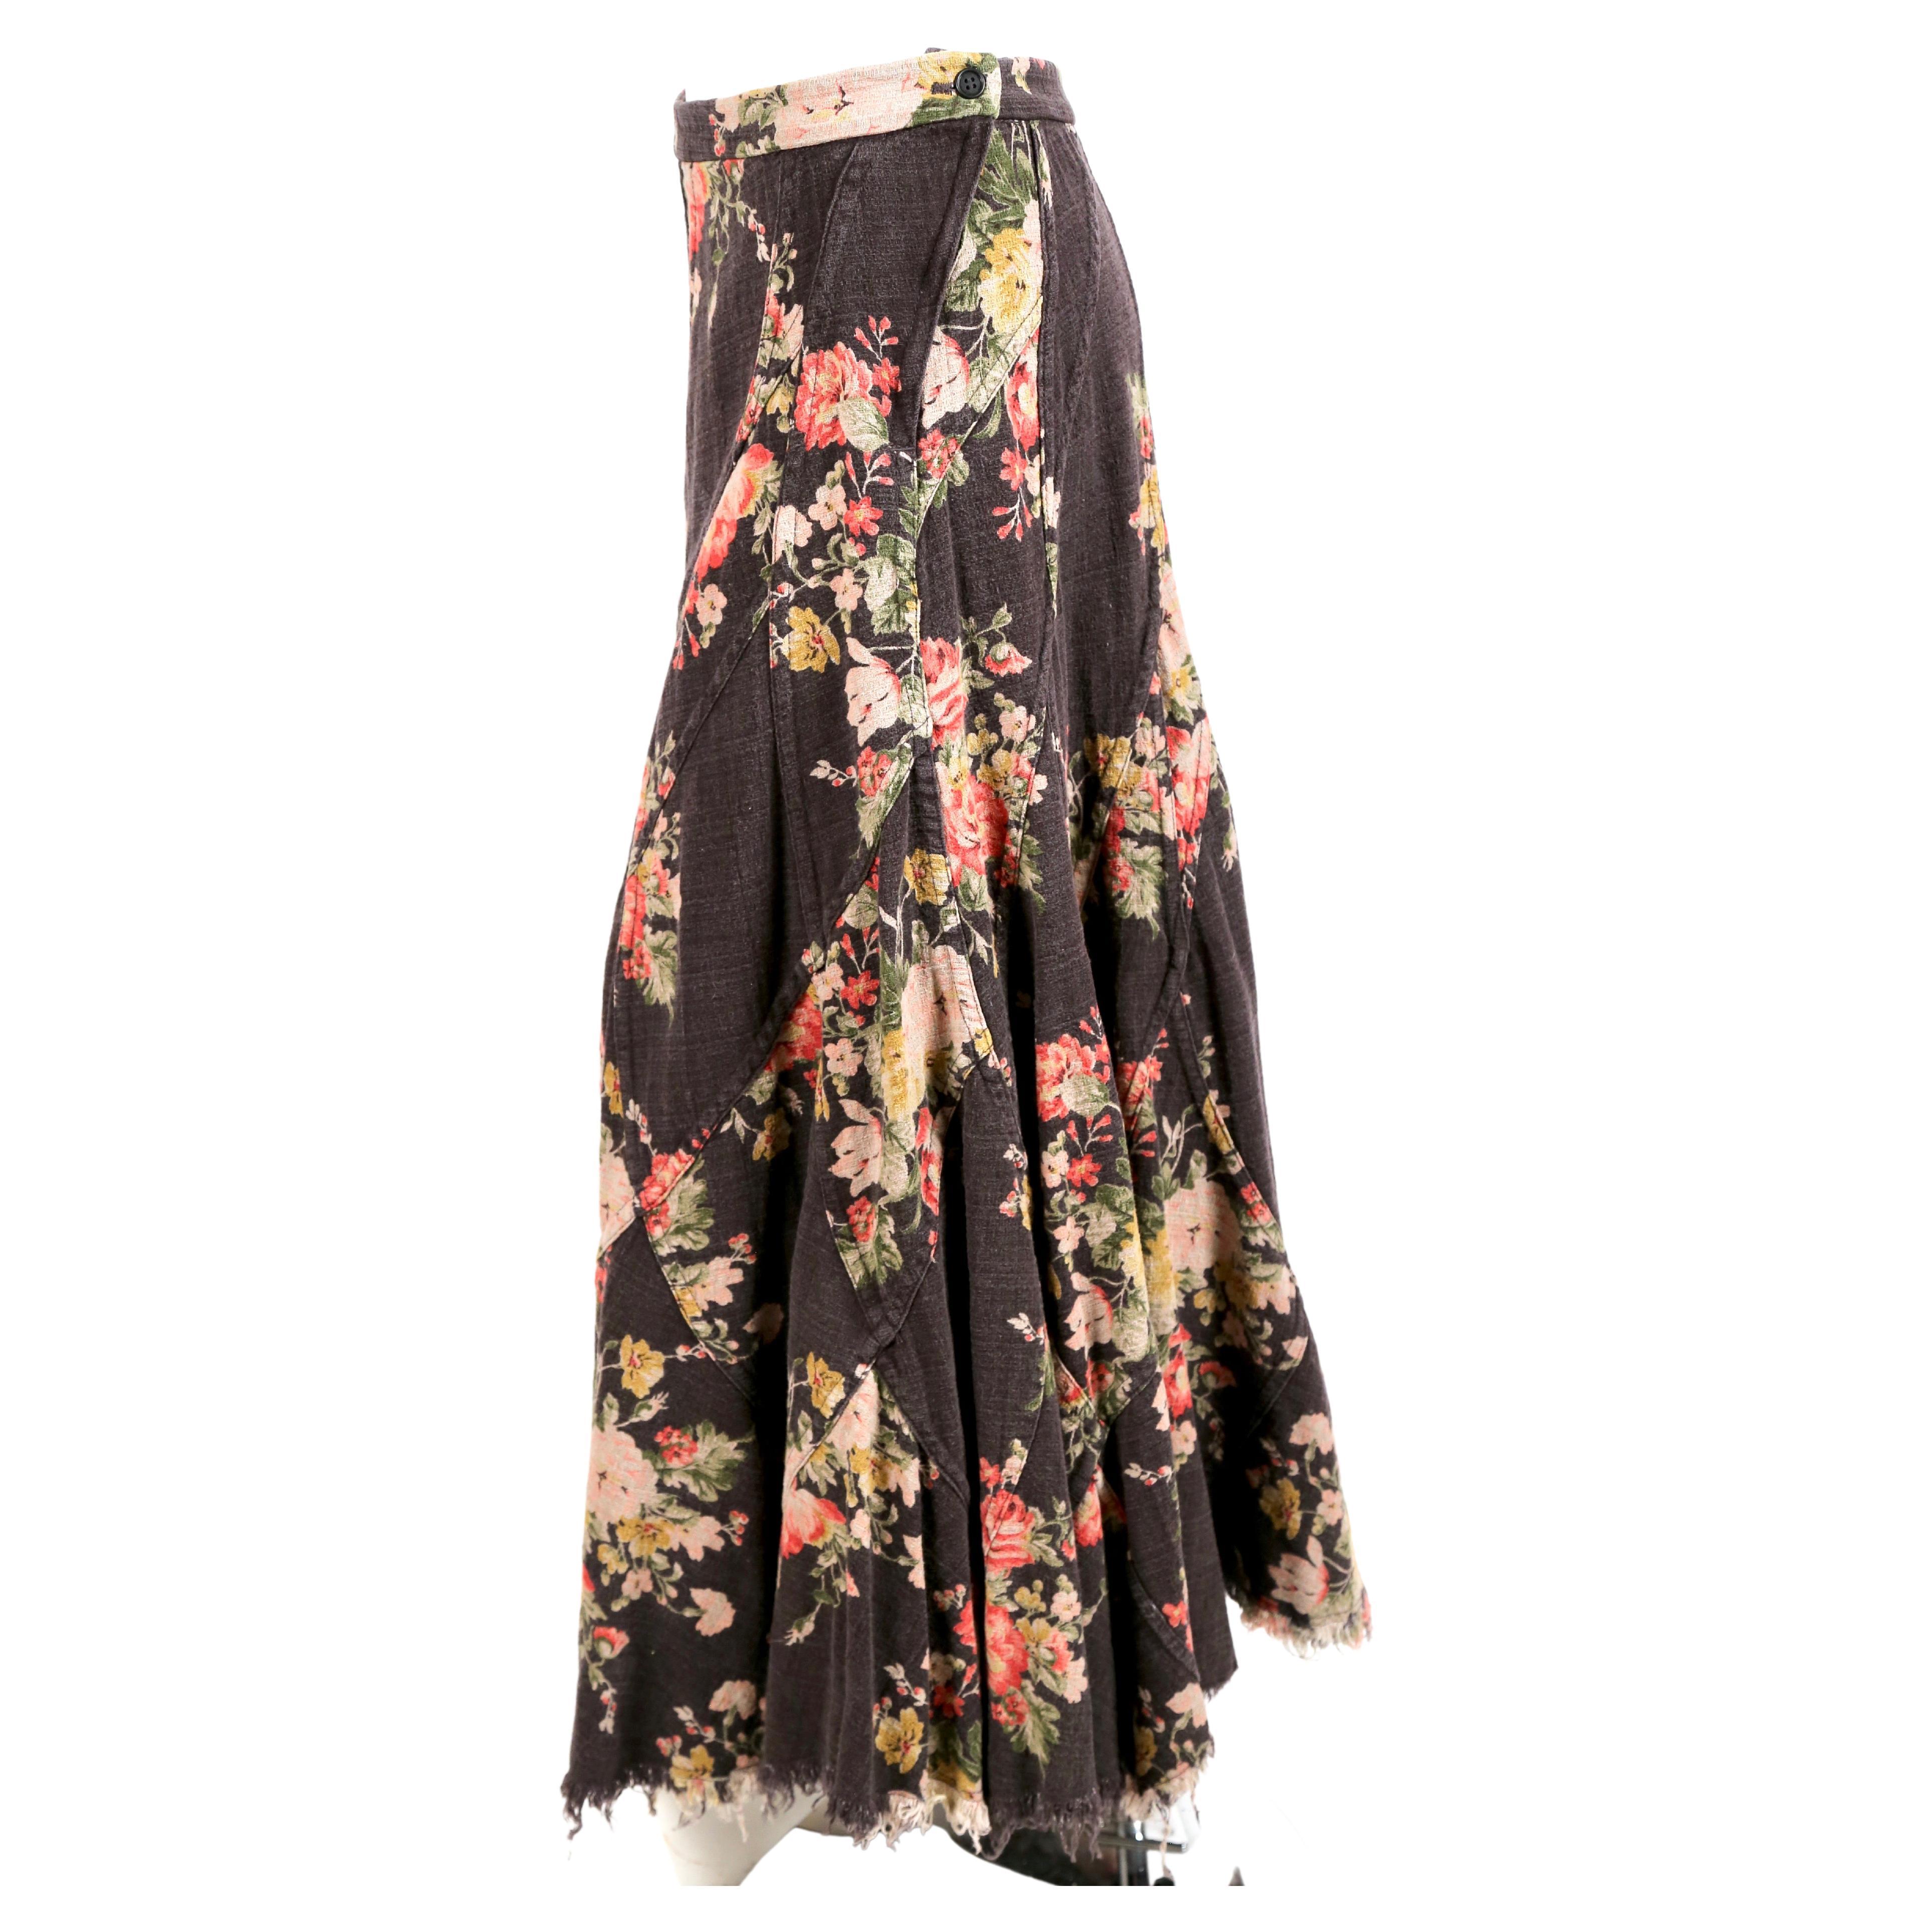 Floral printed cotton skirt with amazing seams and frayed hemline designed by Junya Watanabe for Comme Des Garcons as seen on the spring 2002 runway. Very flattering shape.  Size M. Approximate measurements: waist 30